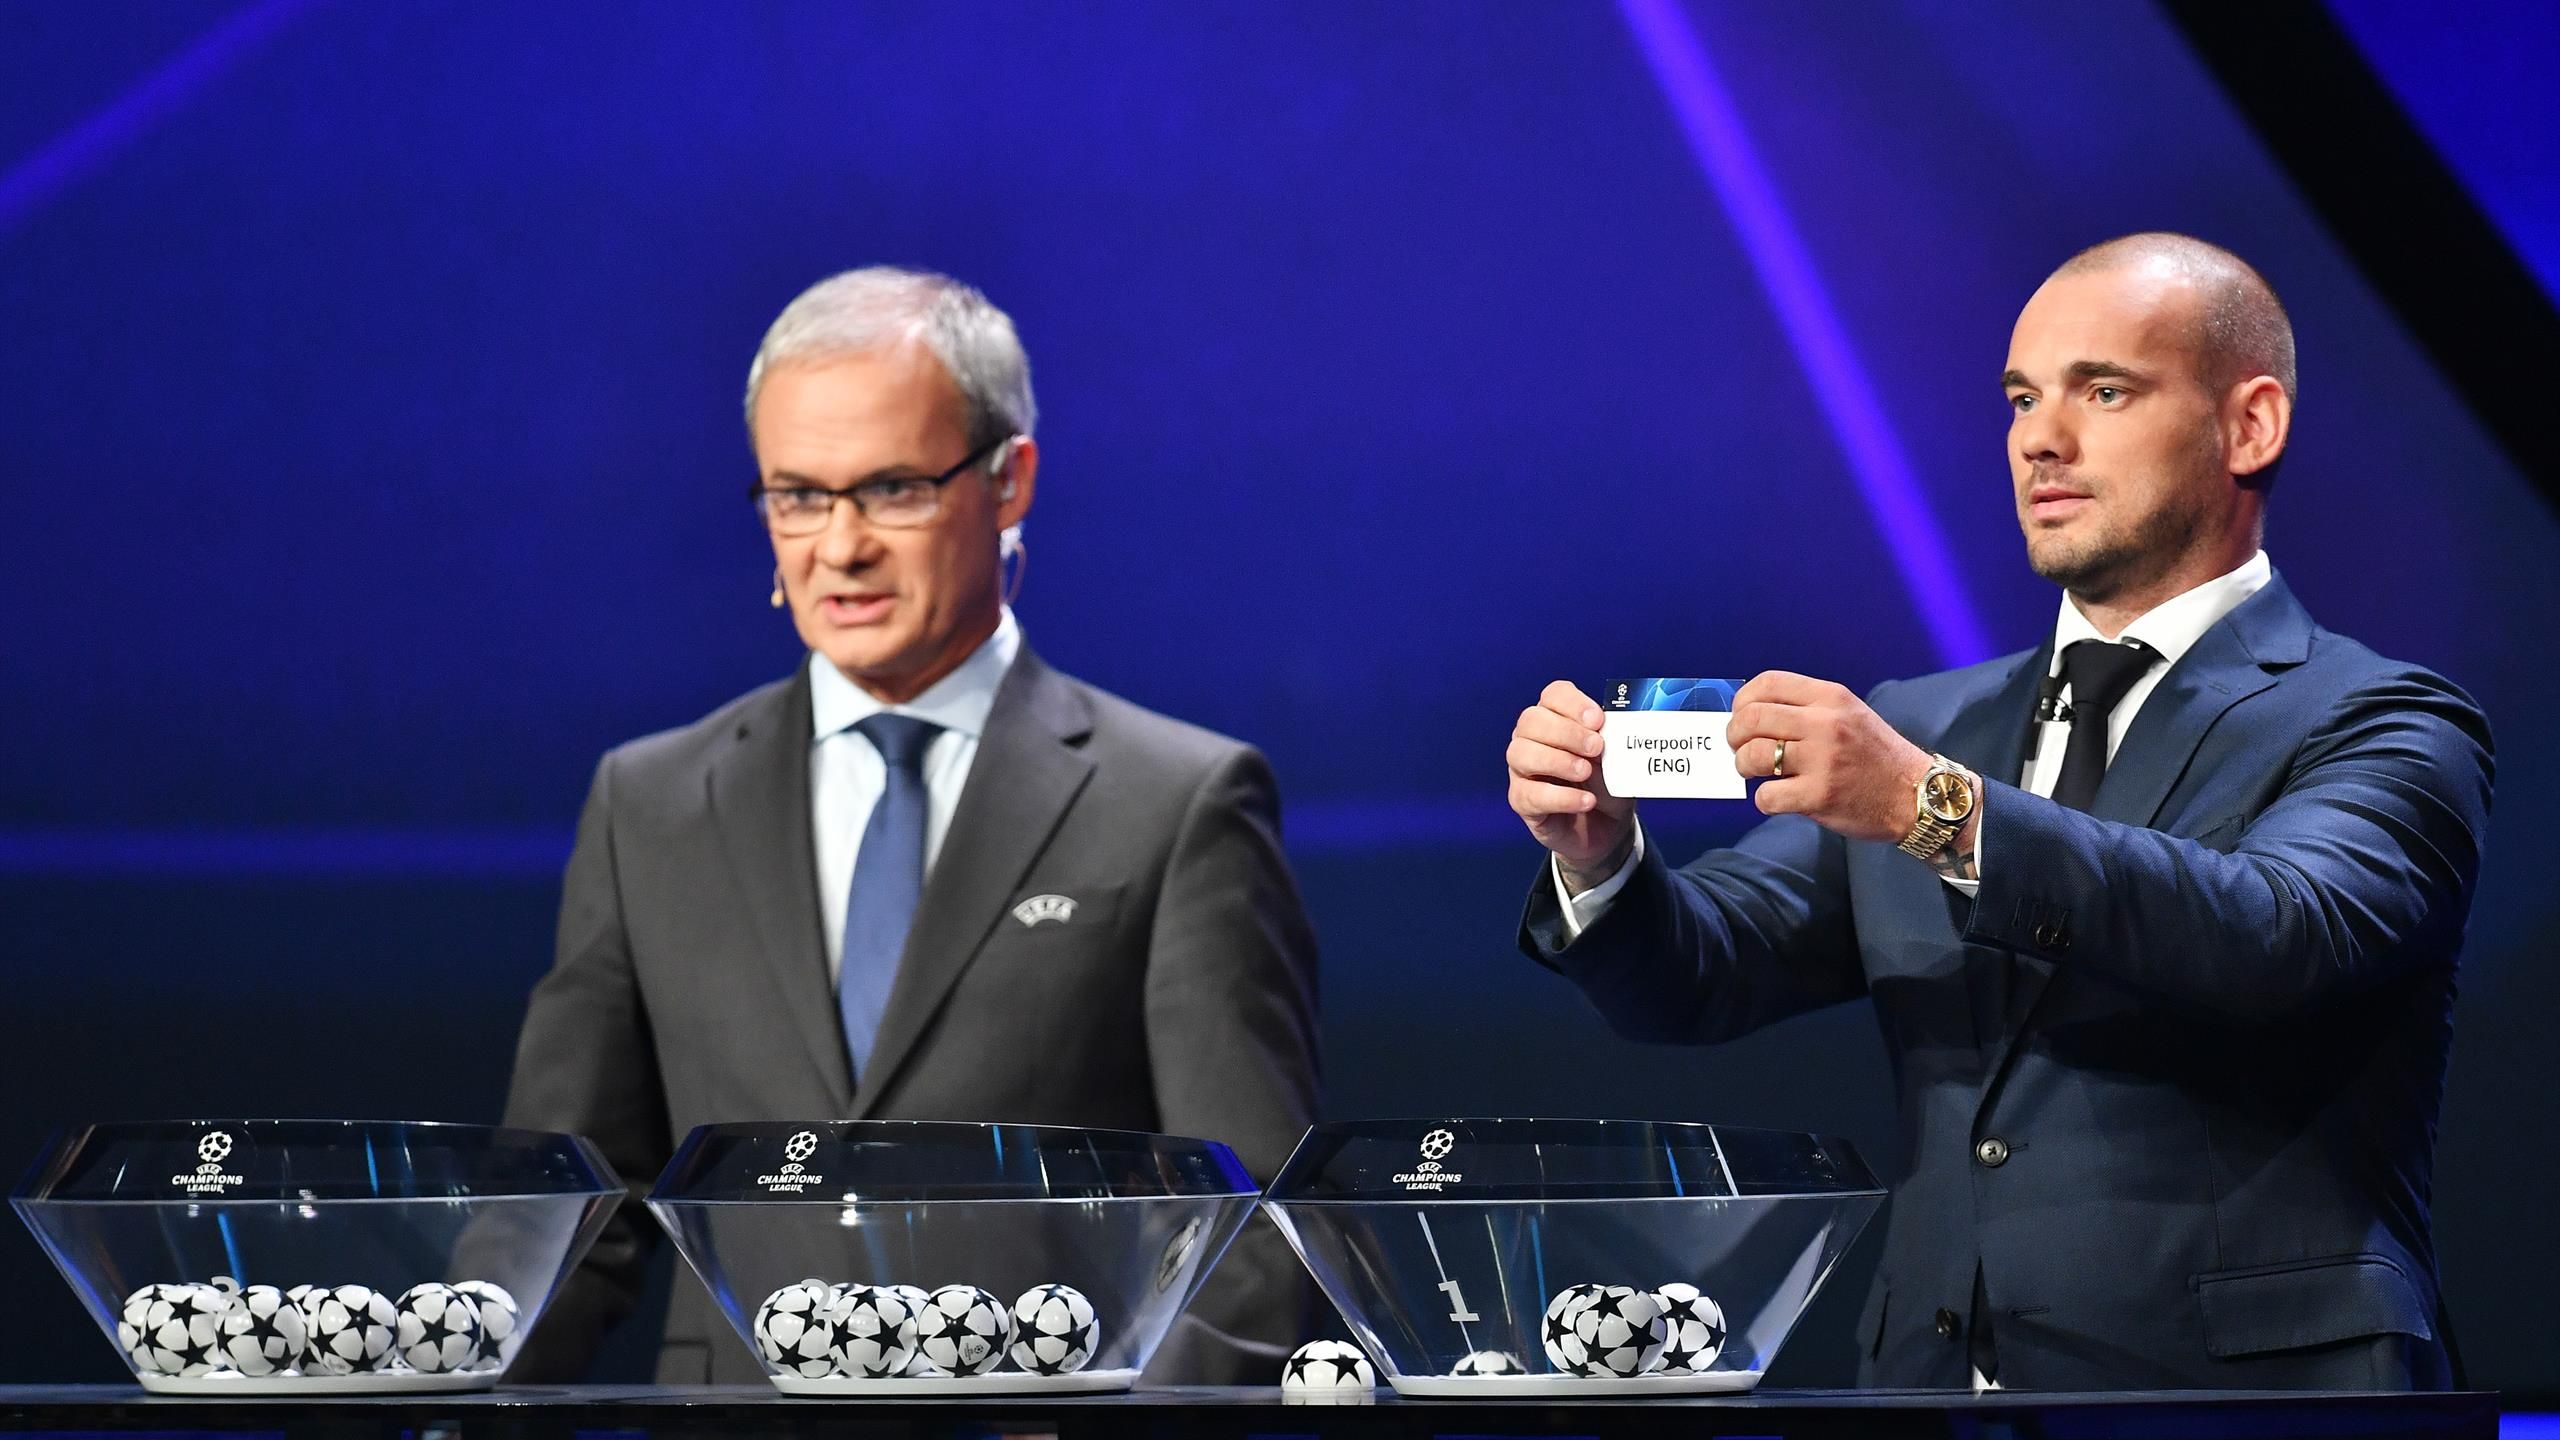 Champions League draw to be held Friday | Daily Sabah-saigonsouth.com.vn